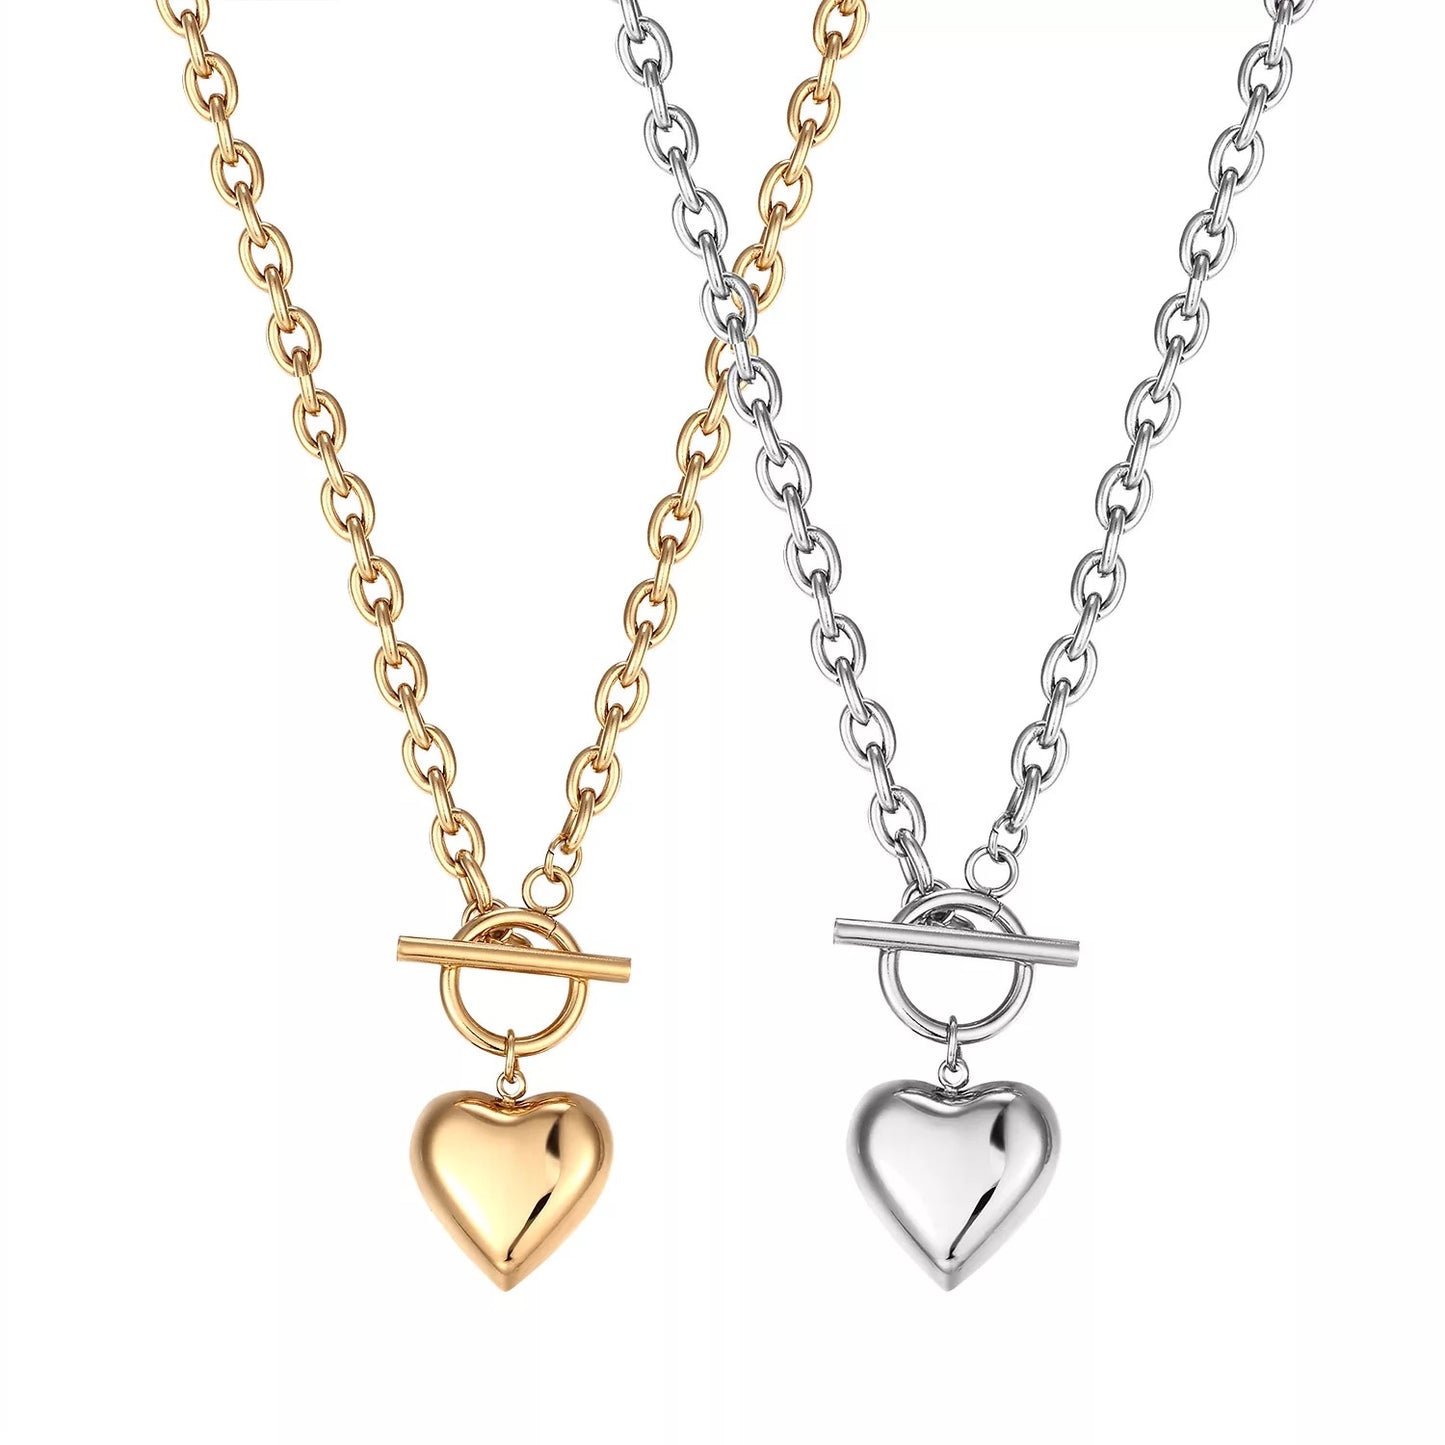 Chained Heart Necklace